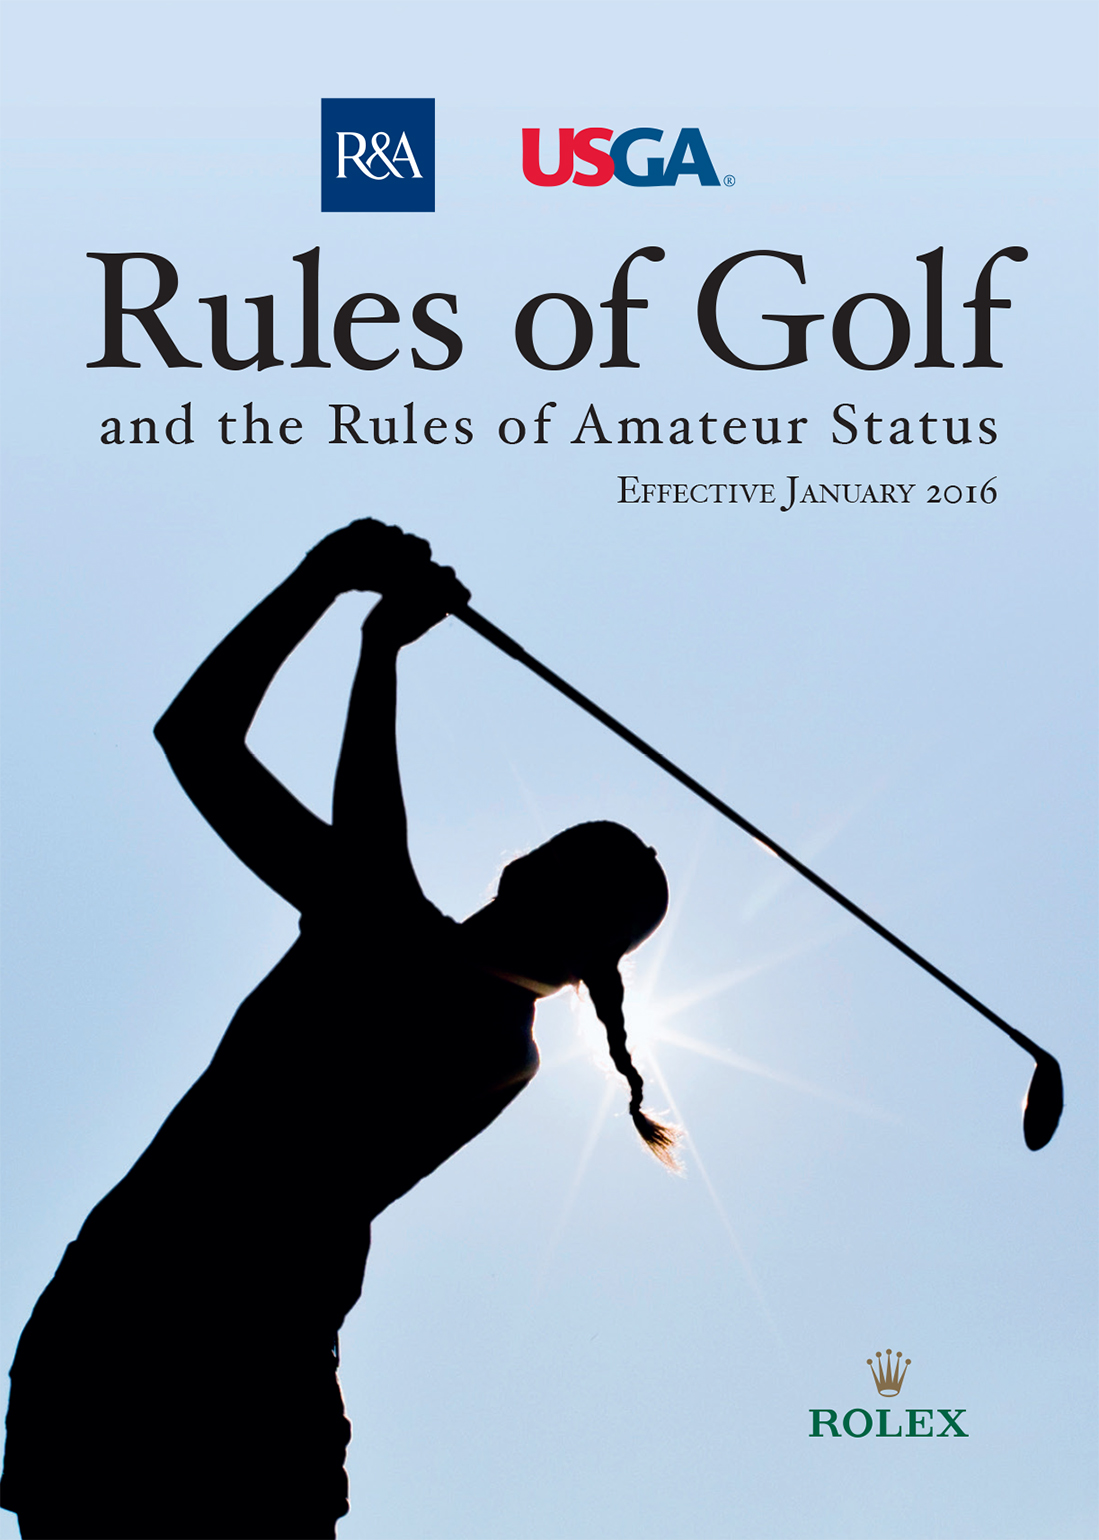 The R&A And The USGA Release 2016 Edition Of Rules Of Golf